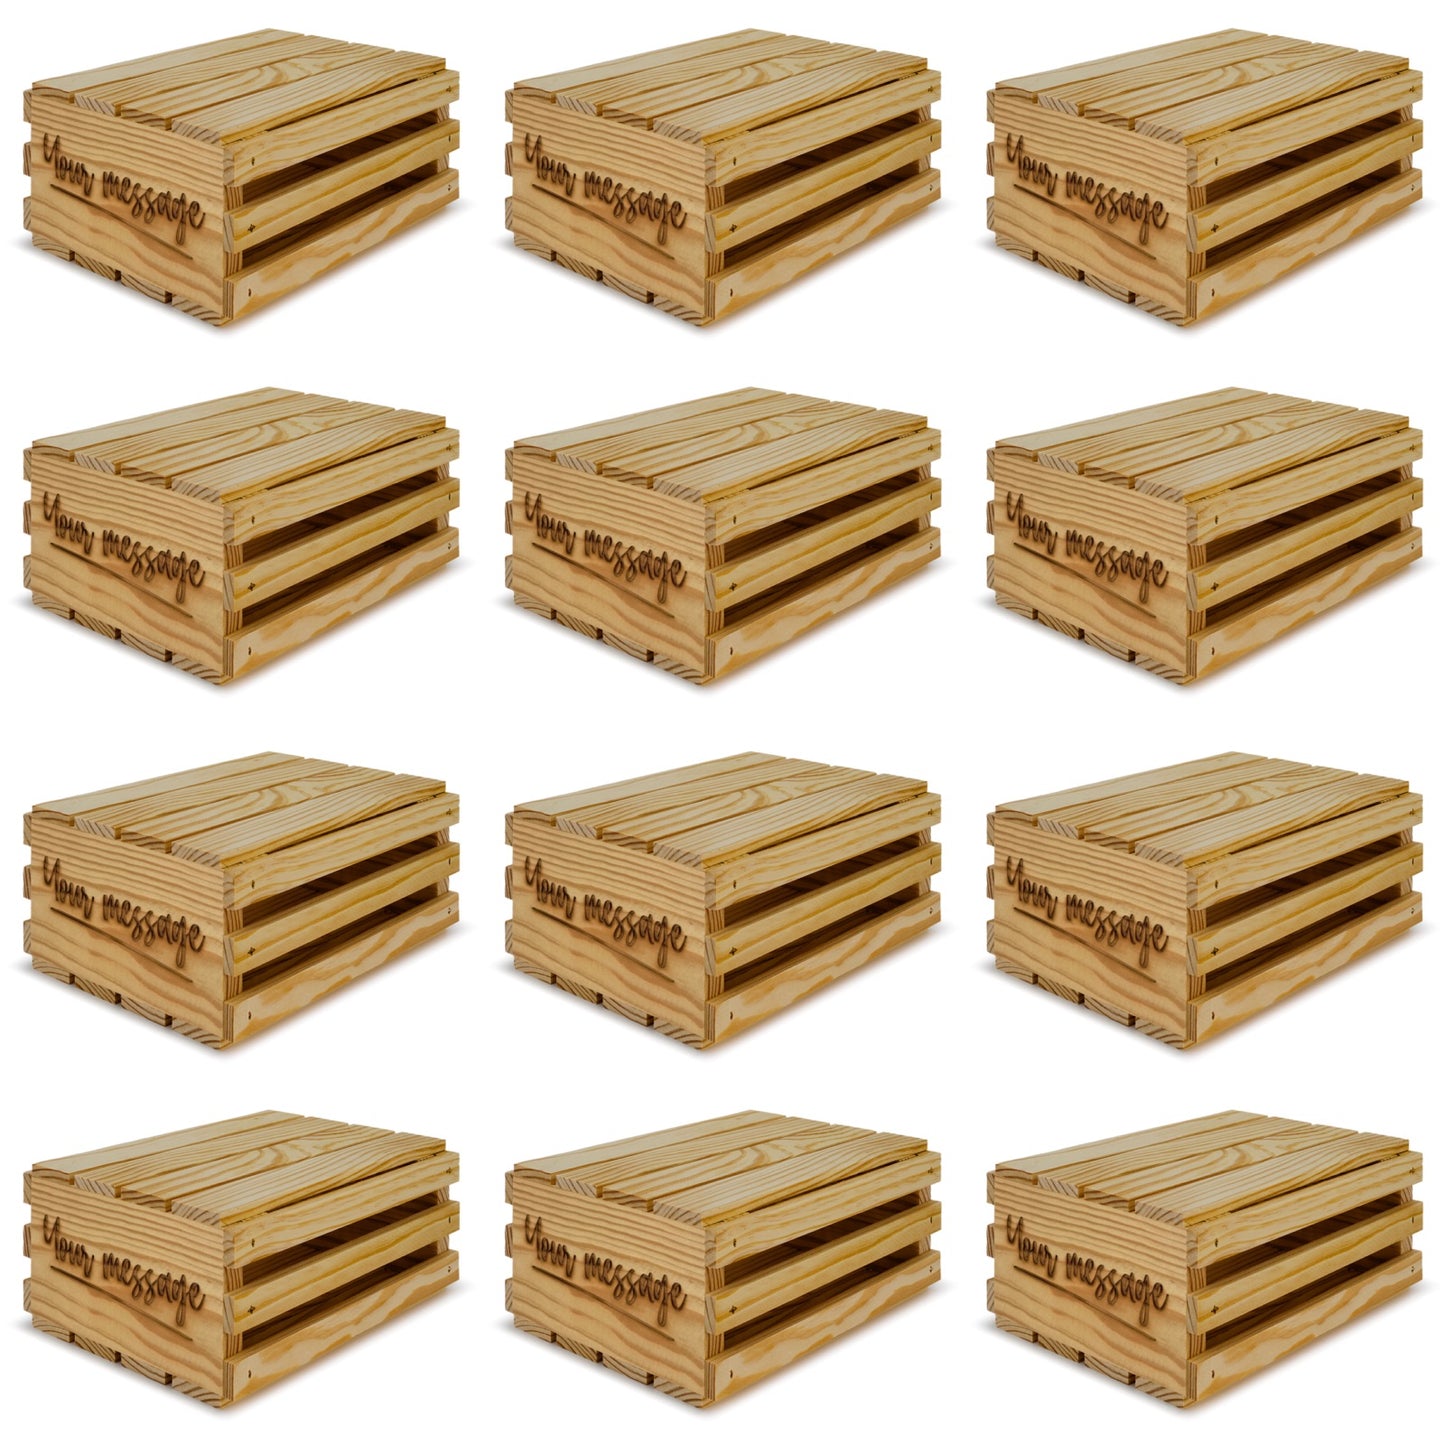 12 Small wooden crates with lid and your custom message 10x8x4.5